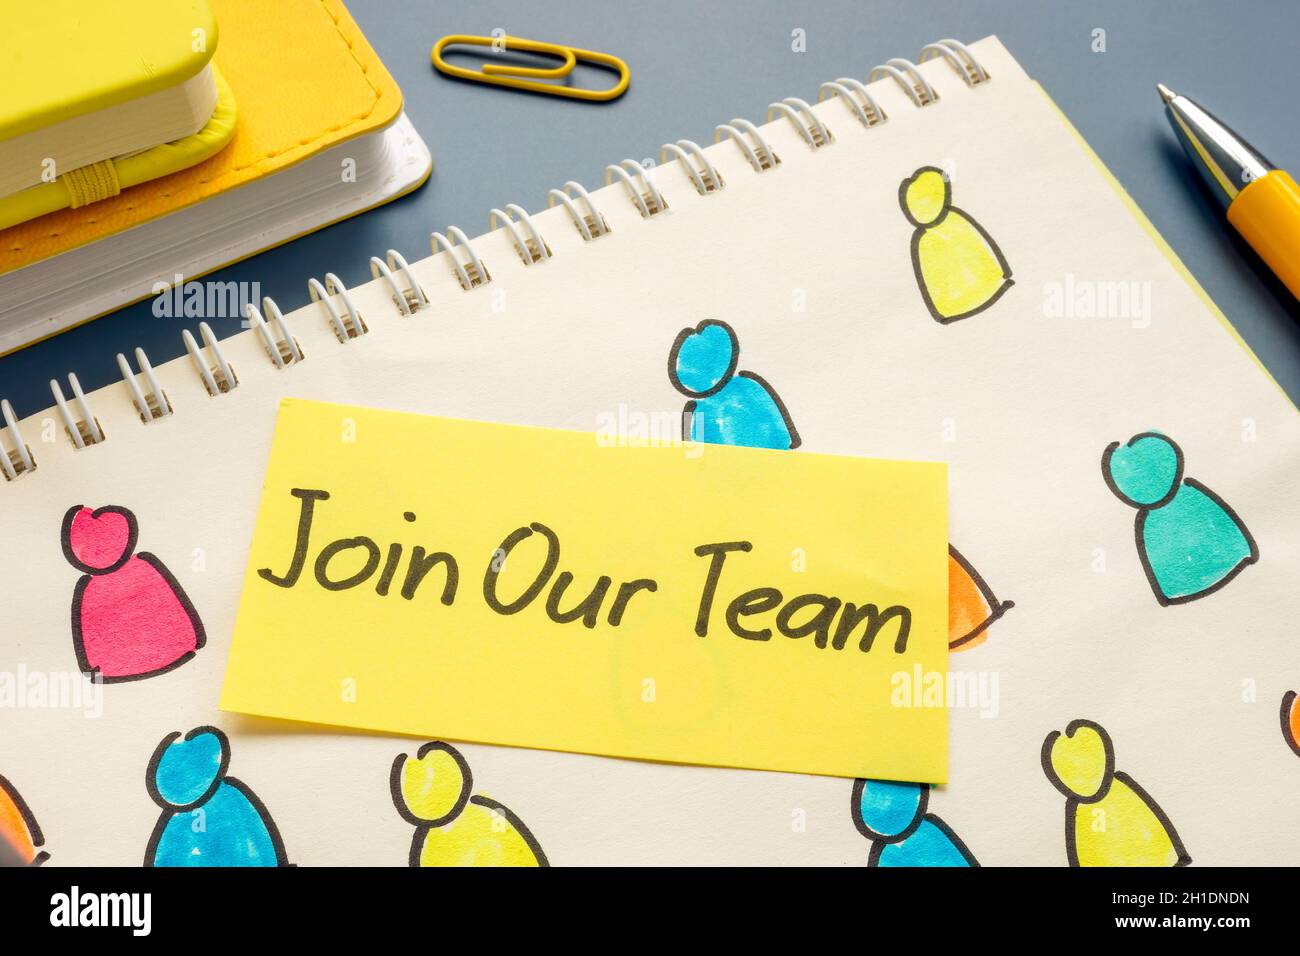 Join our team and notebook with drawn figures. Stock Photo